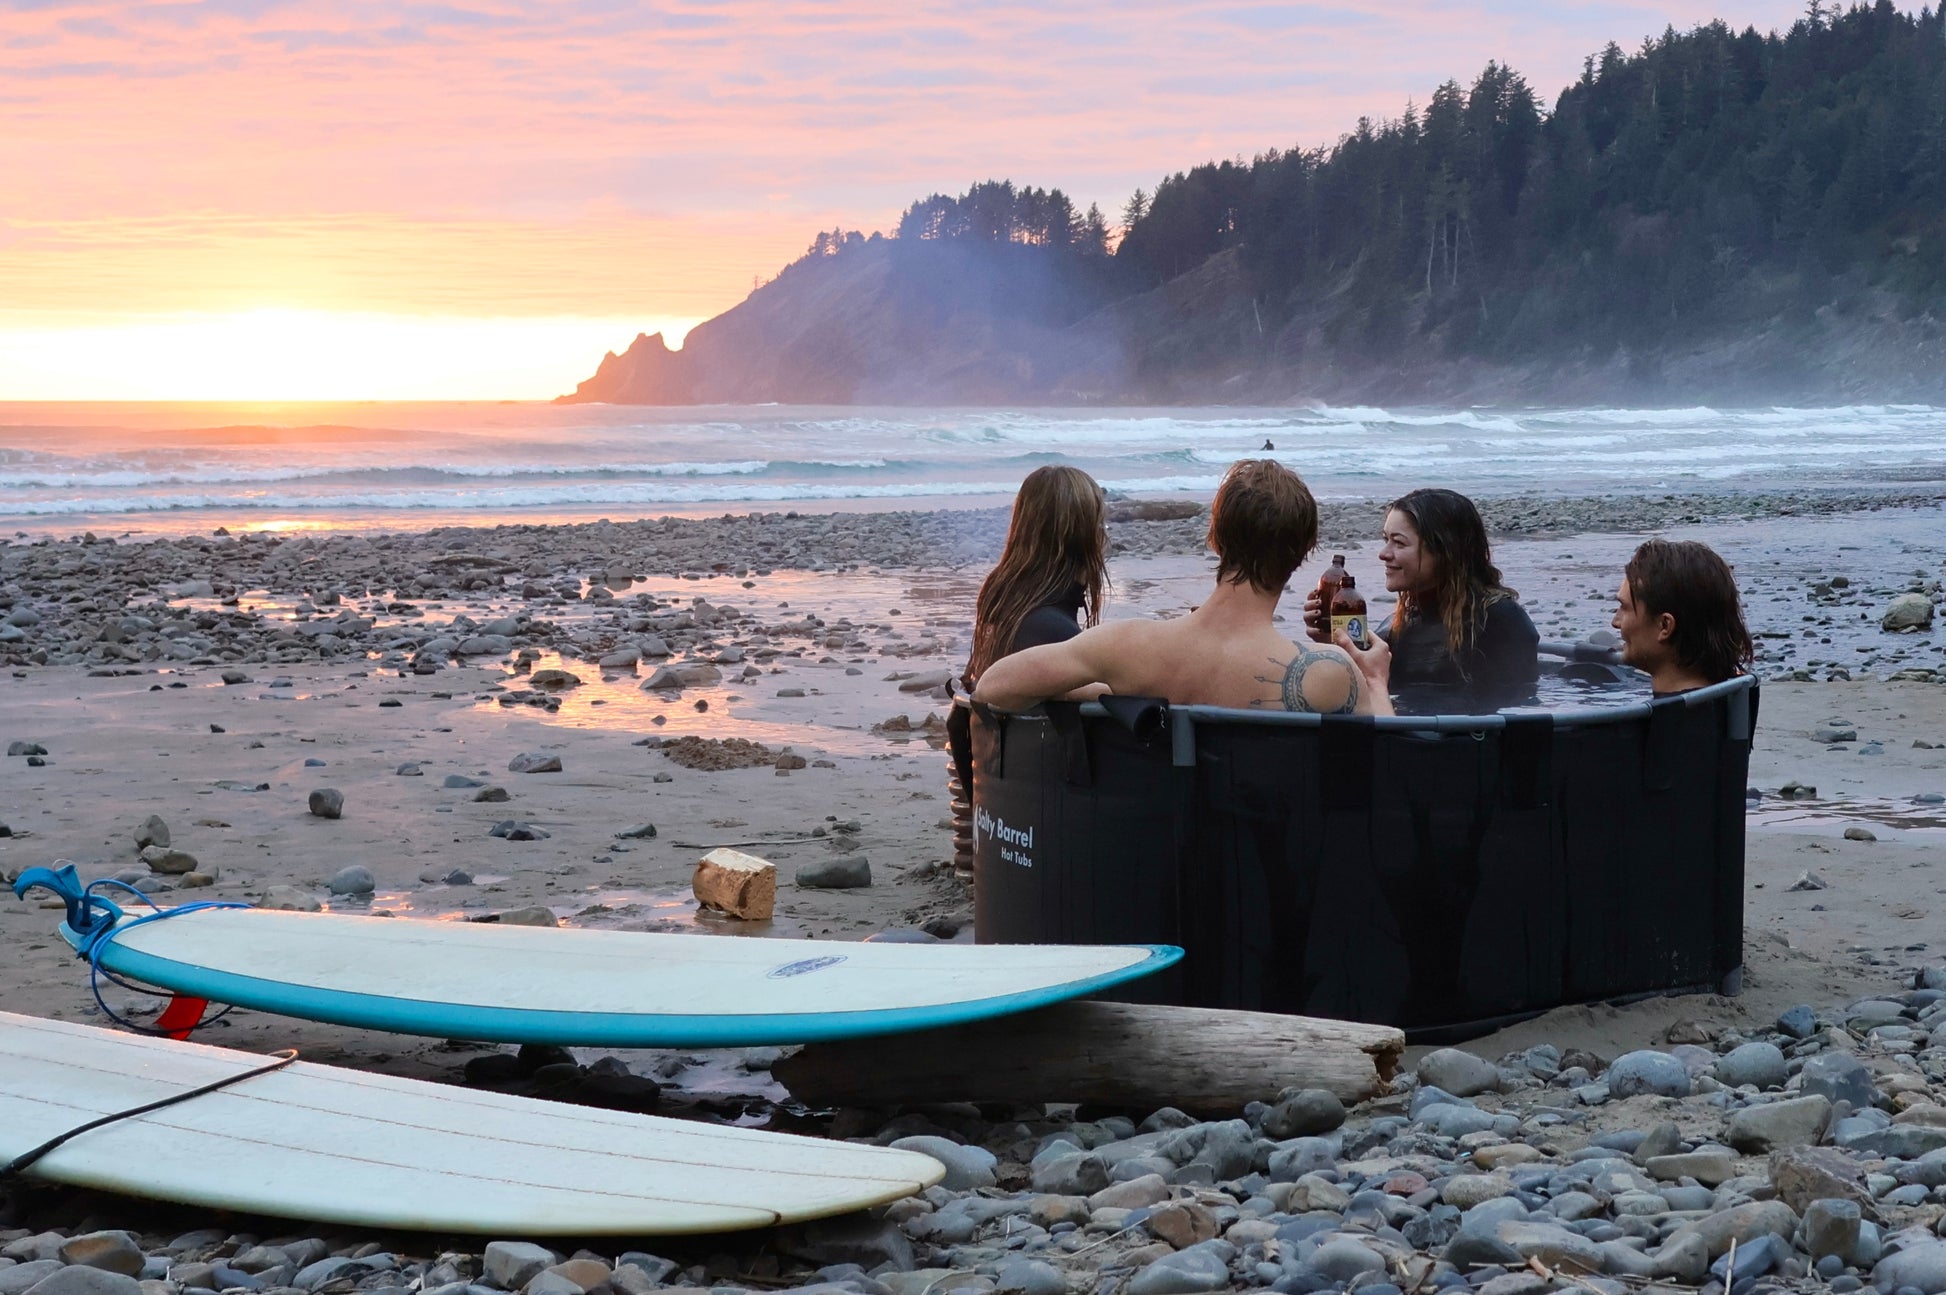 Surfers in hot tub on the beach